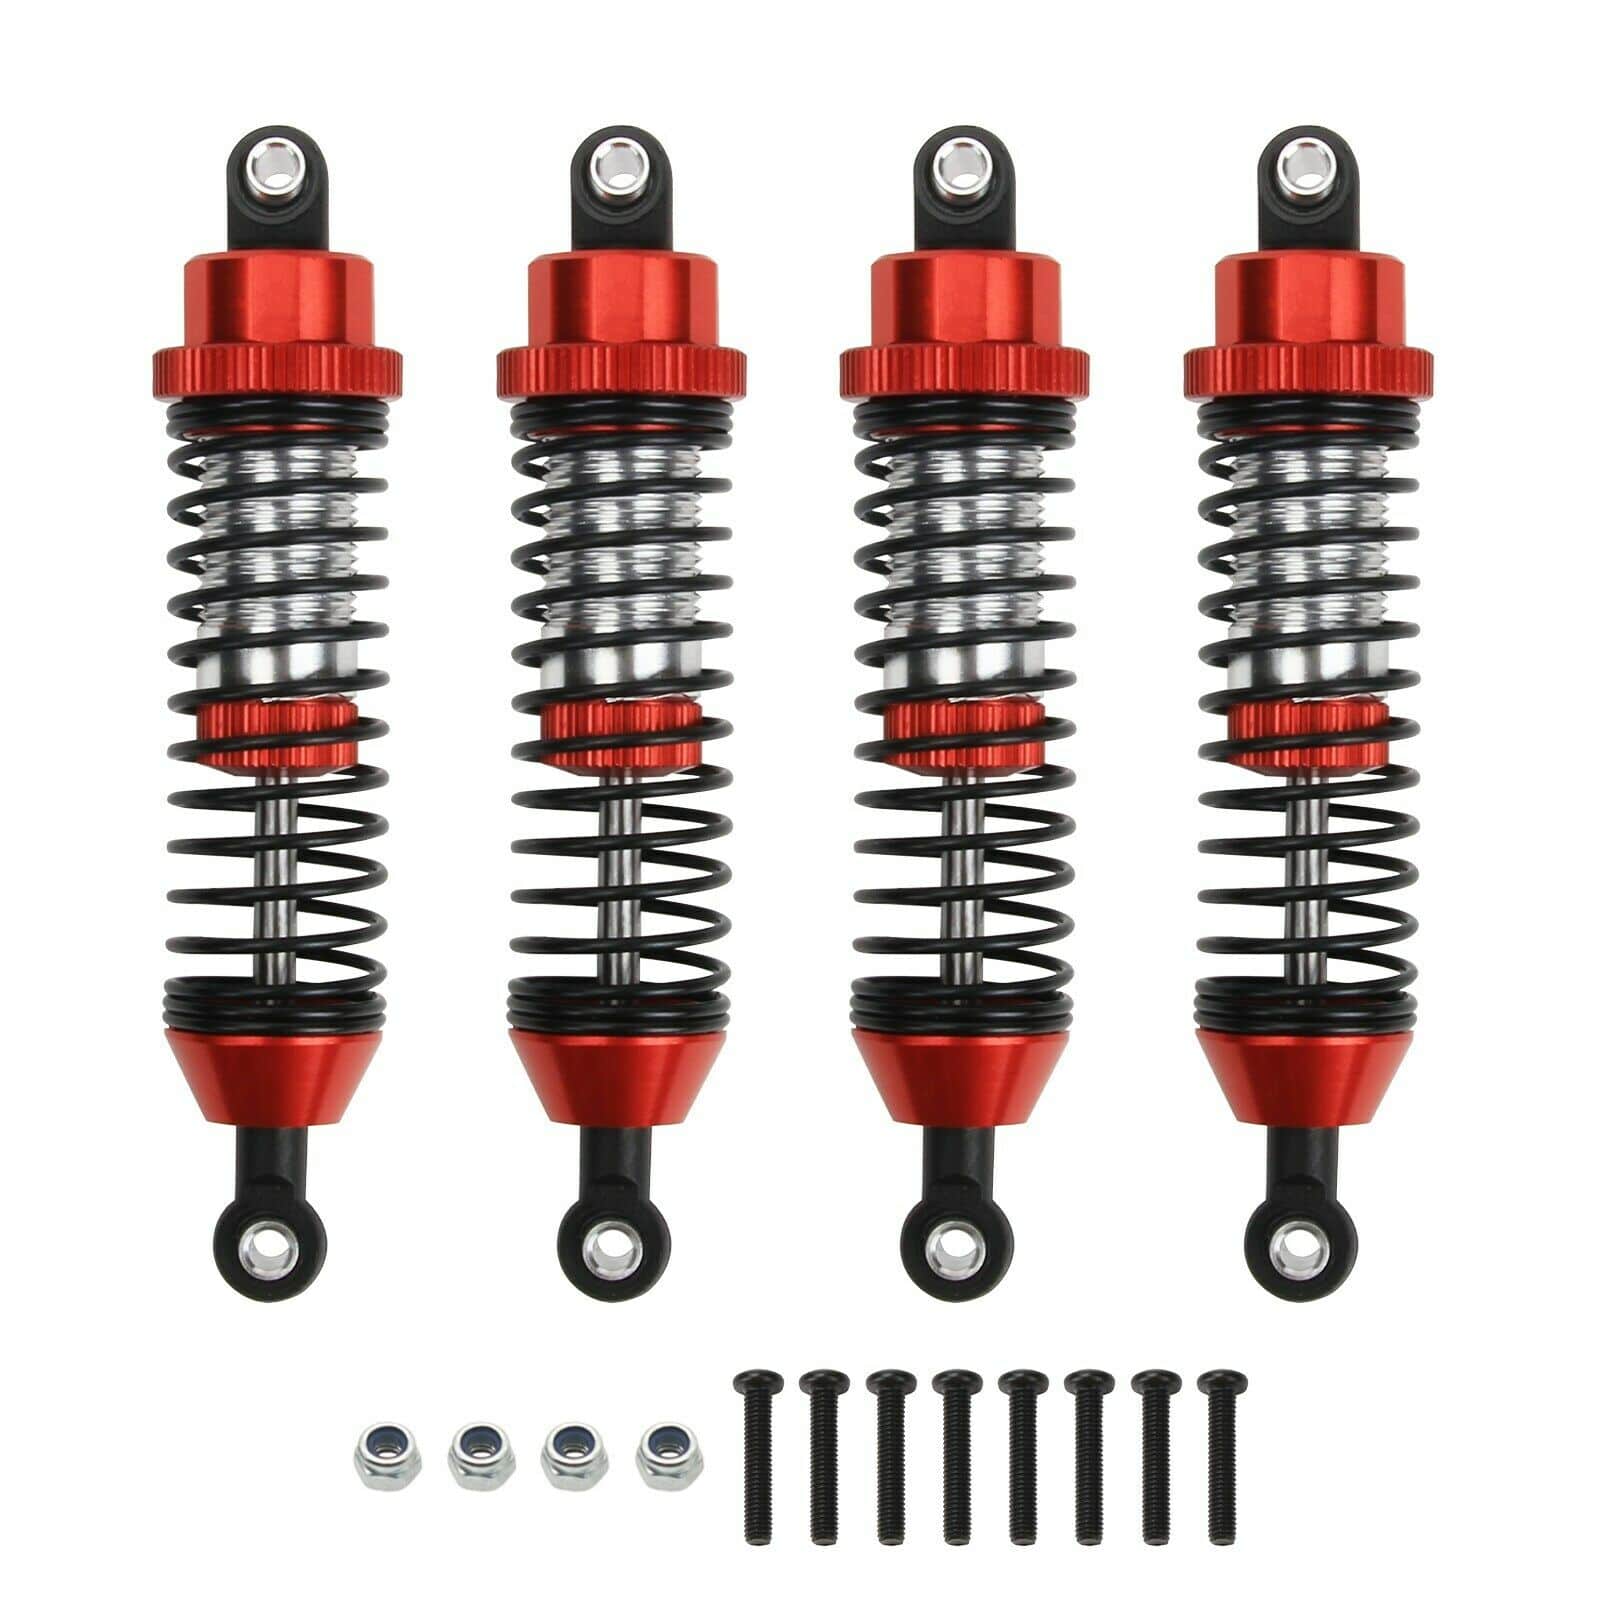 RCAWD REDCAT UPGRADE PARTS Red RCAWD RCFront Rear Shock BS214-011 for 1/10 Redcat Racing Blackout SC XTE XBE PRO